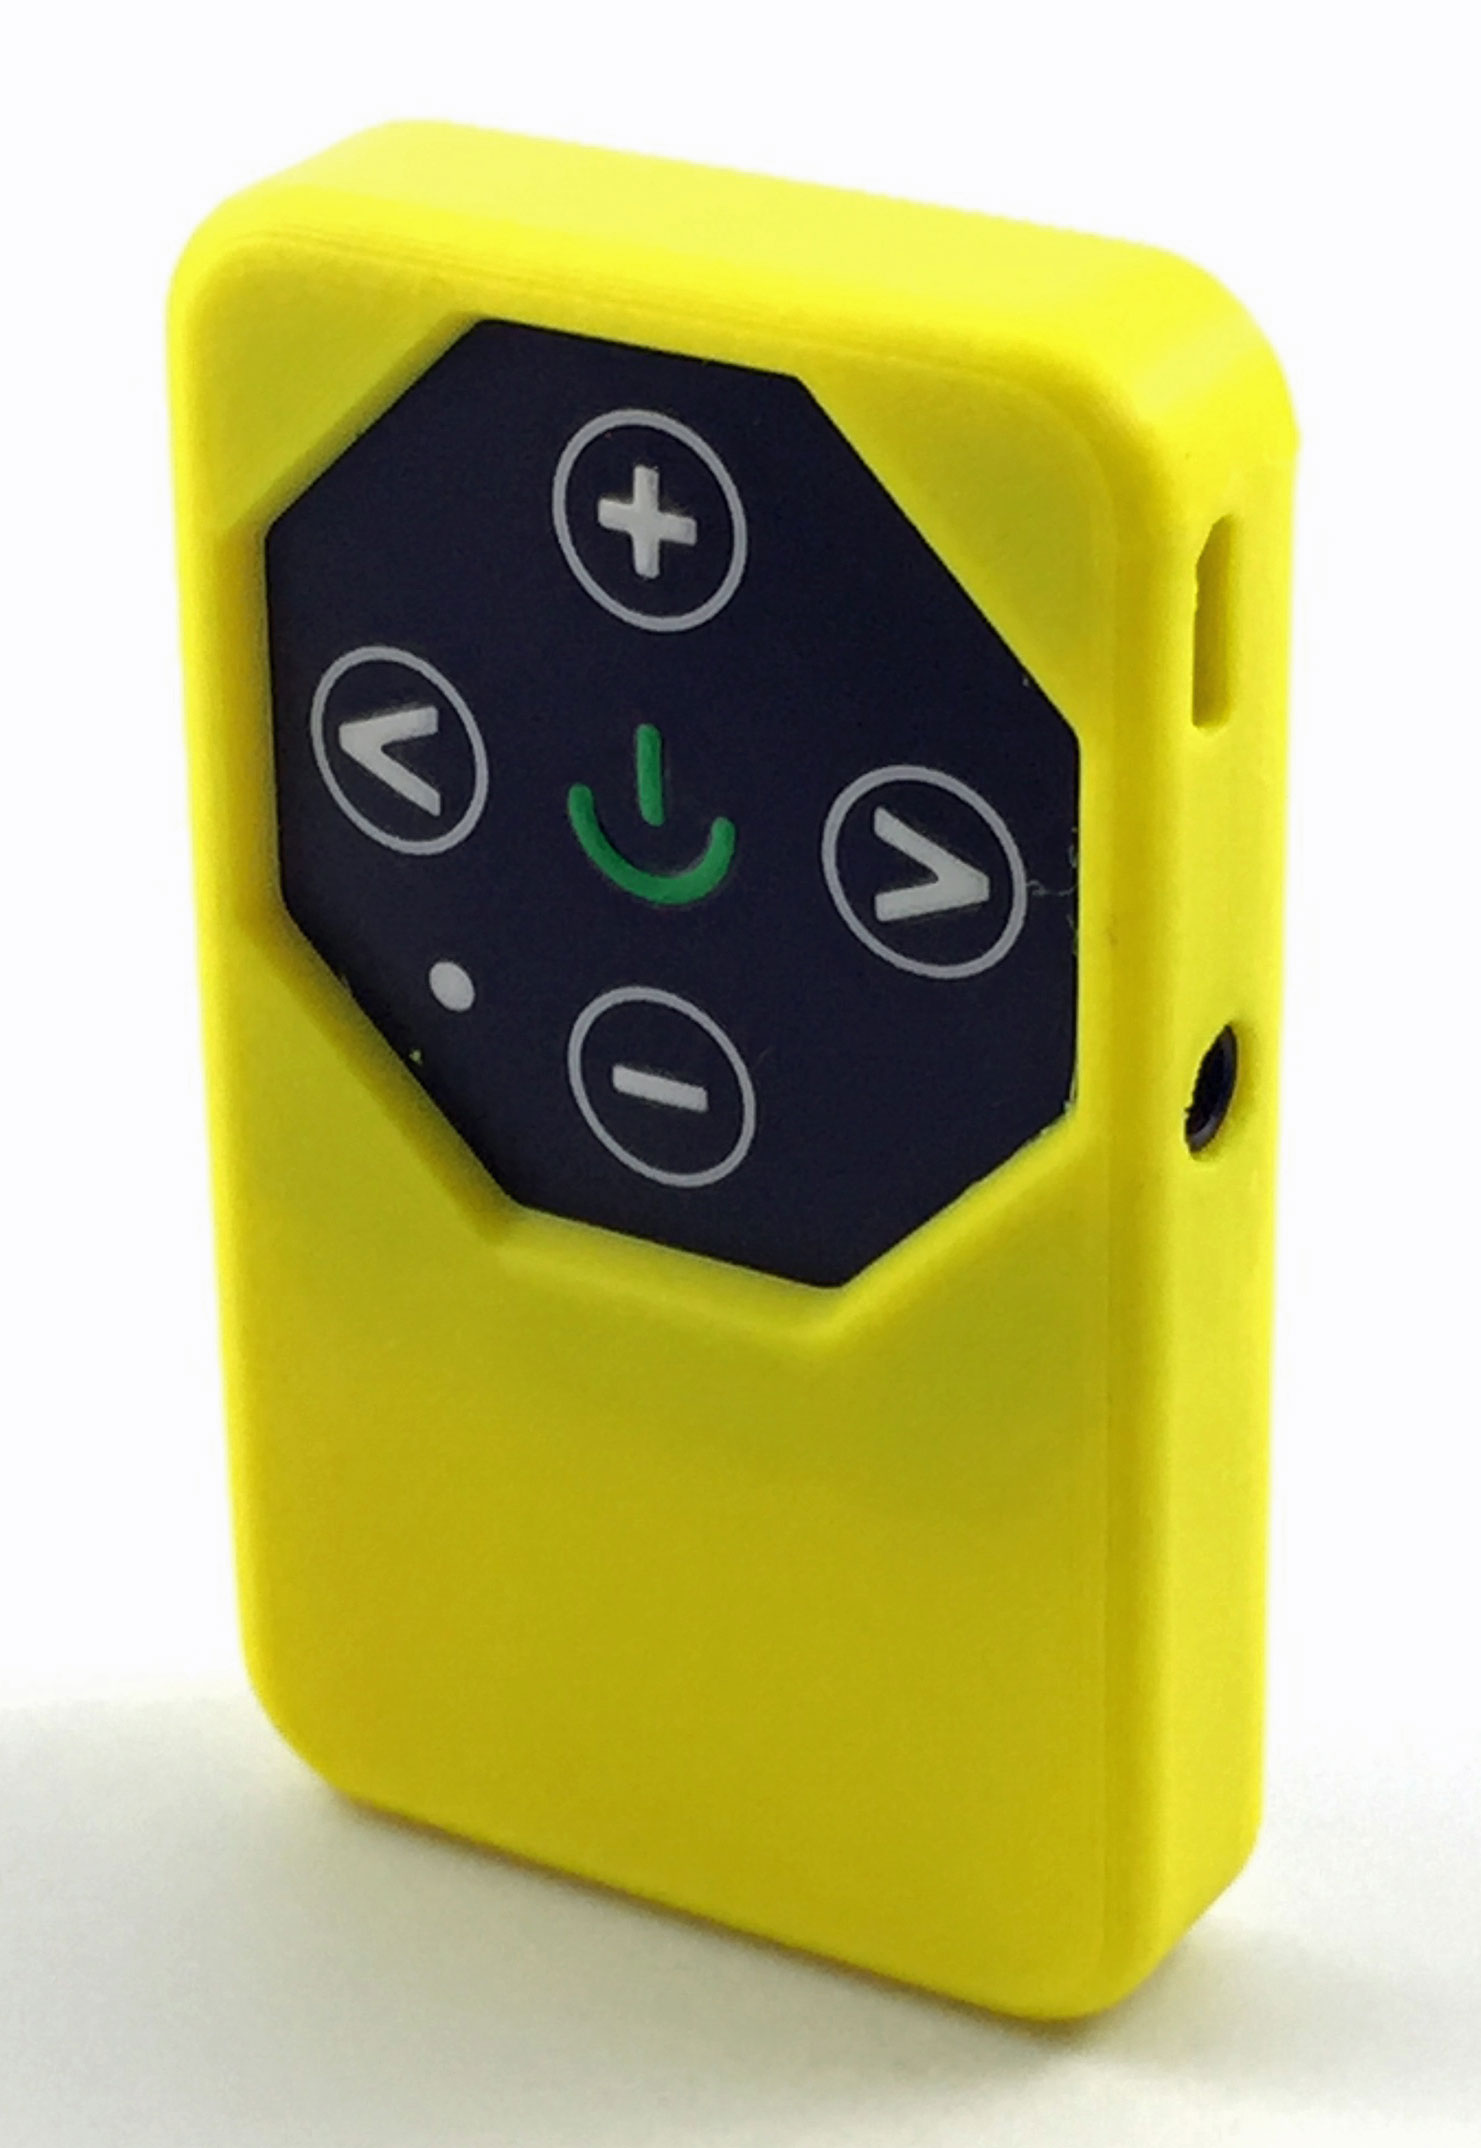 SeedPlayer personal solar player, yellow